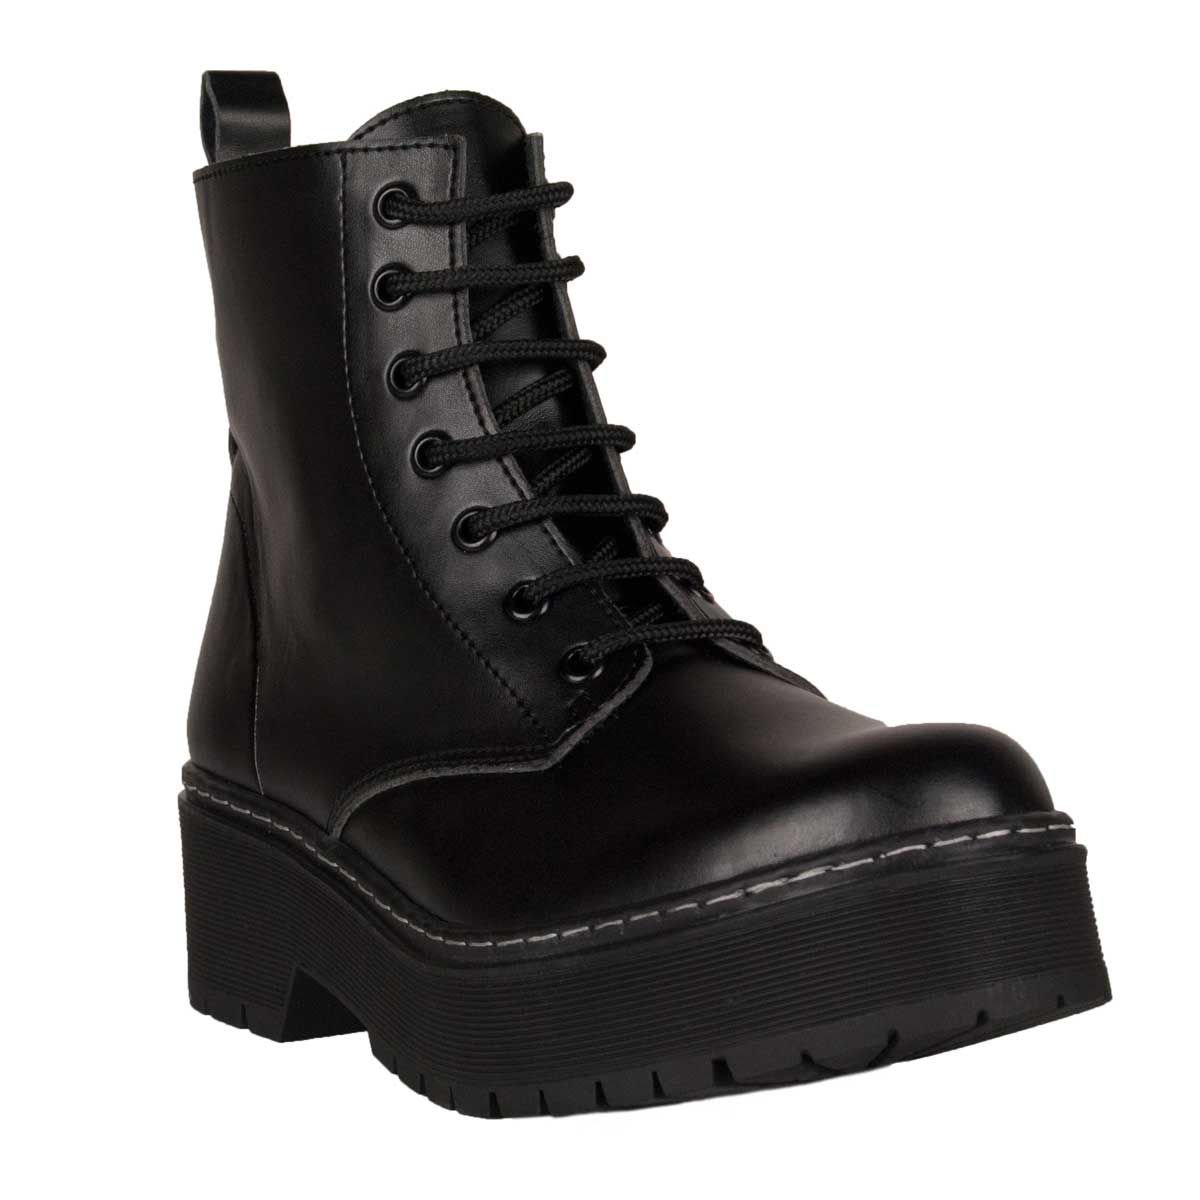 Modern and comfortable military-style boot for lady with platform and material, very easy to clean. It carries laces of thick thread and metallic eyelets in black, as well as a side zipper, to facilitate footwear. It brings anterior and posterior buttress, it also comes doubly sewn, providing greater quality and consistency to the boot. Interior lined with textile, with padded plant. Stitched floor. Anti-slip rubber sole with tacos. Made in Spain.